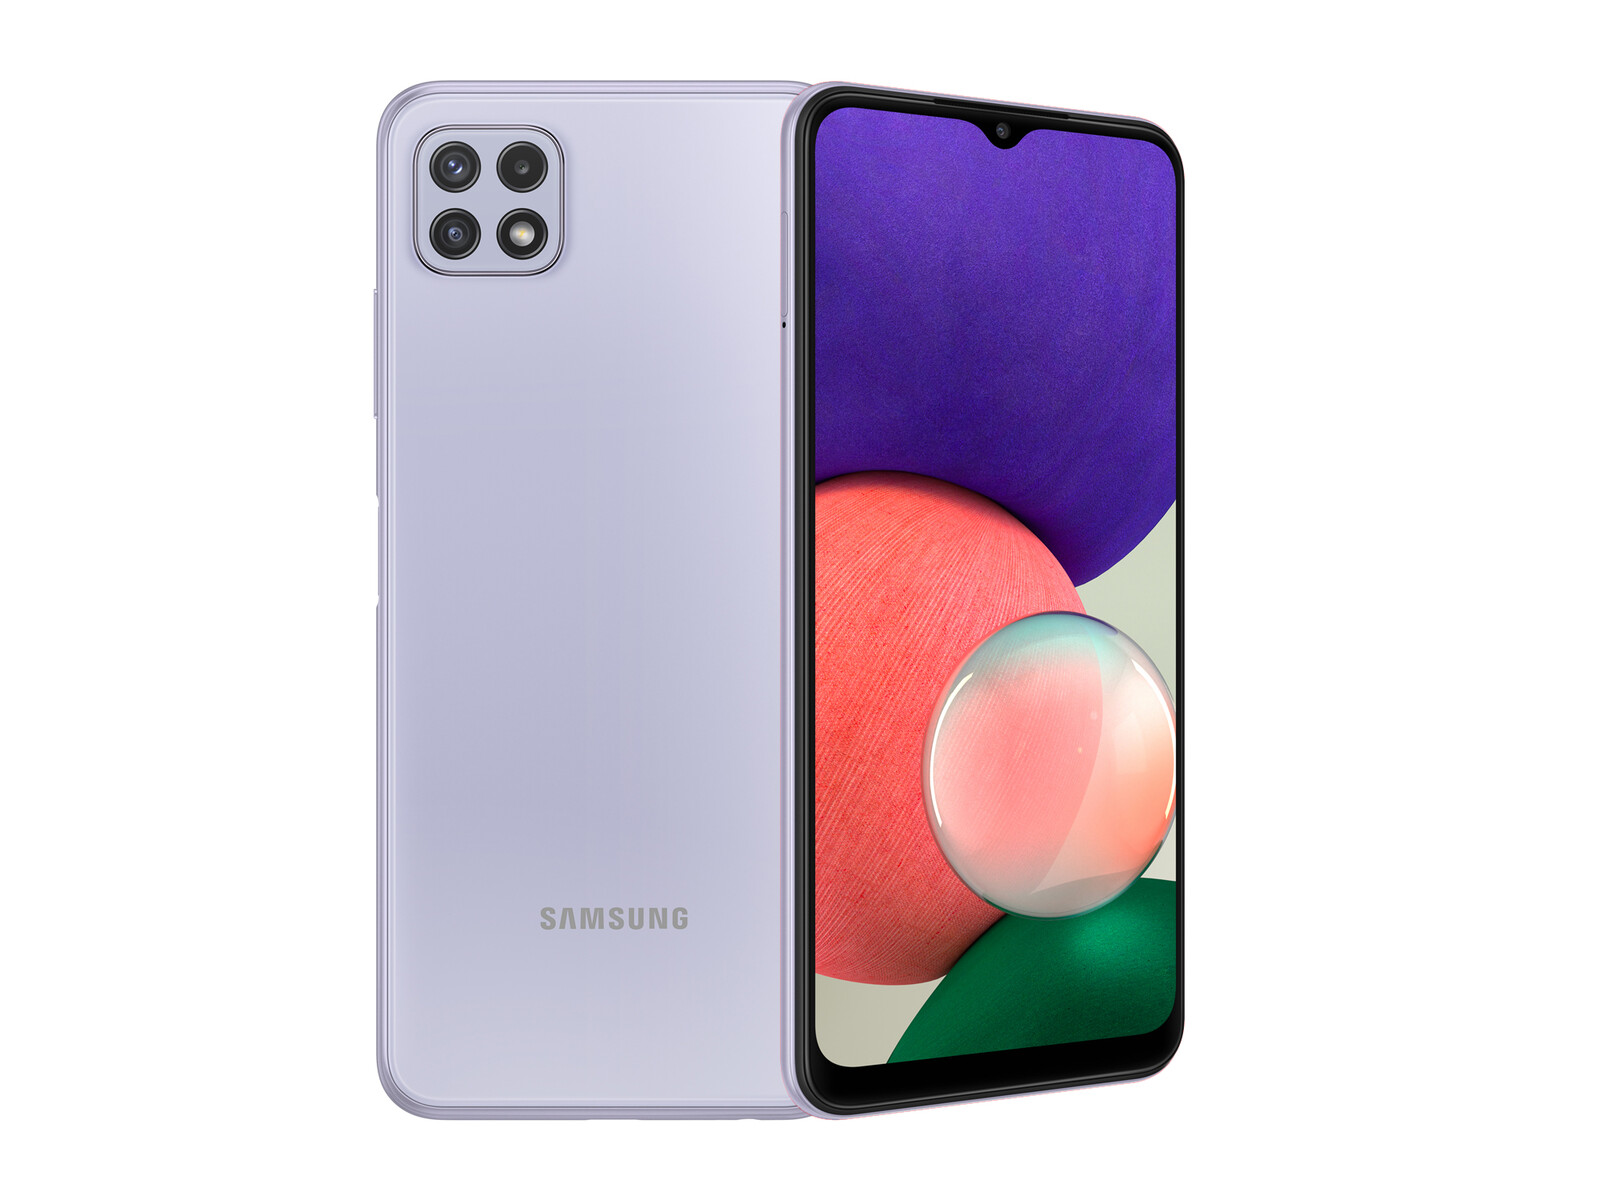 Entire 2022 Samsung Galaxy A Series Lineup To Receive Big Imaging Improvements With Inclusion Of